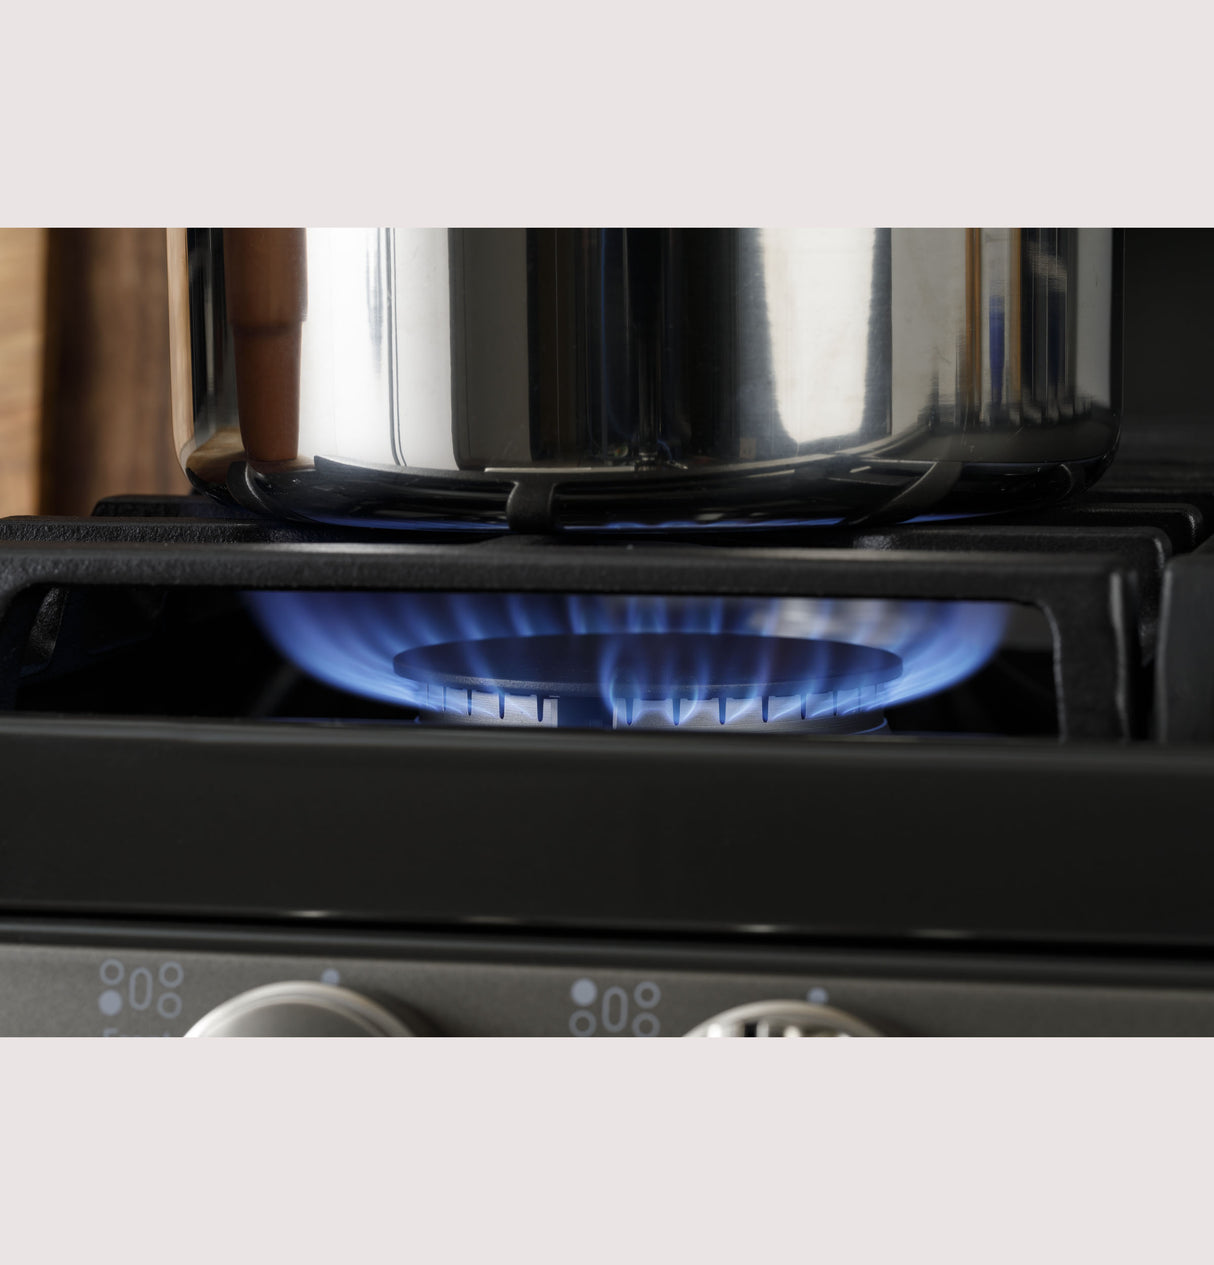 GE(R) 30" Free-Standing Gas Convection Range with No Preheat Air Fry - (JGB735DPBB)